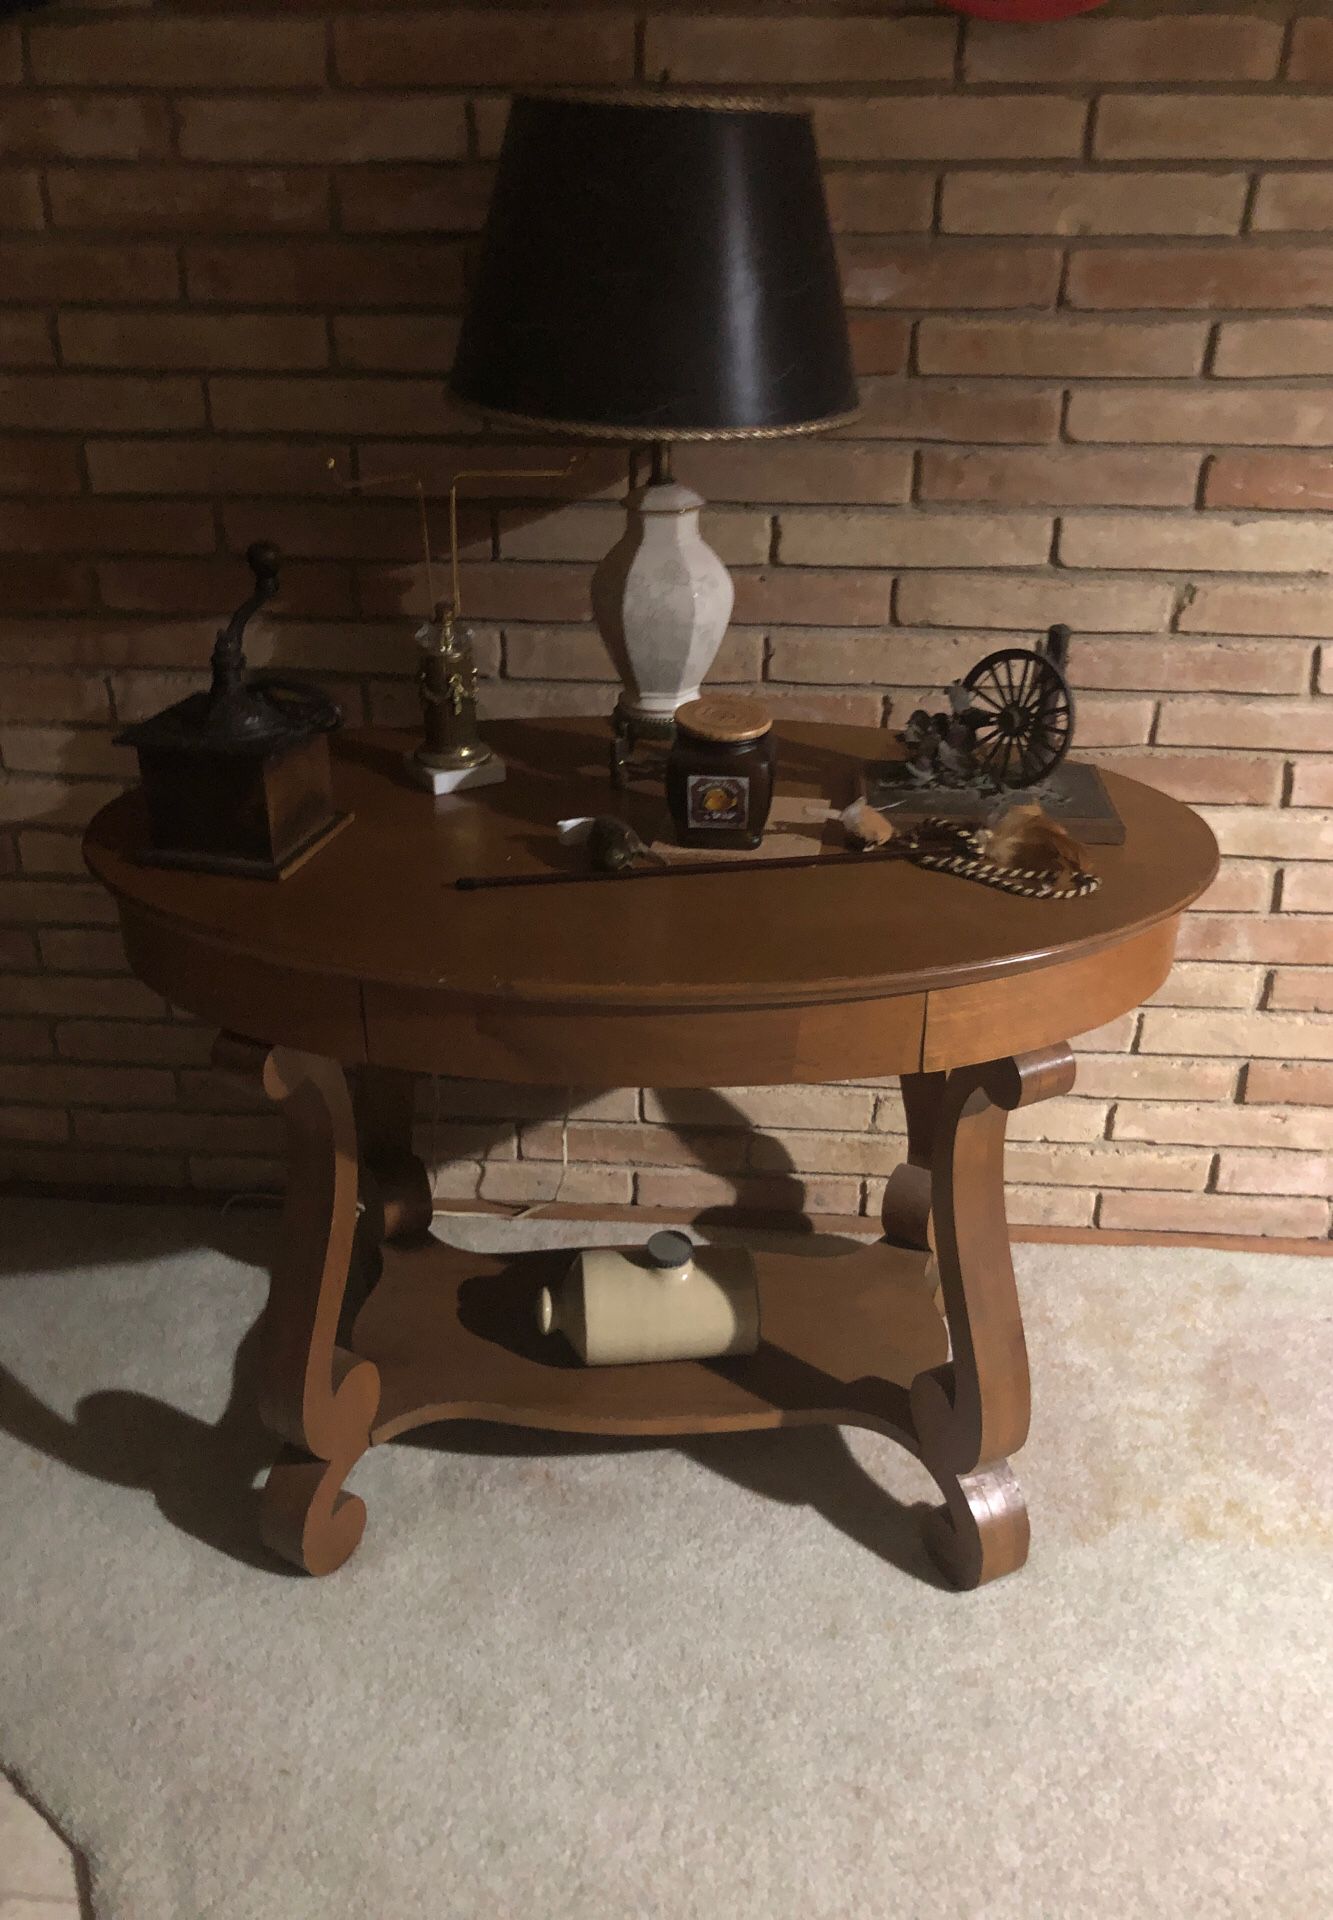 Everything Goes! Lamp, Table, antique Coffee Grinder, Quail&WagonWheel metal sculpture by T J Nichols, and “old”ceramic tank